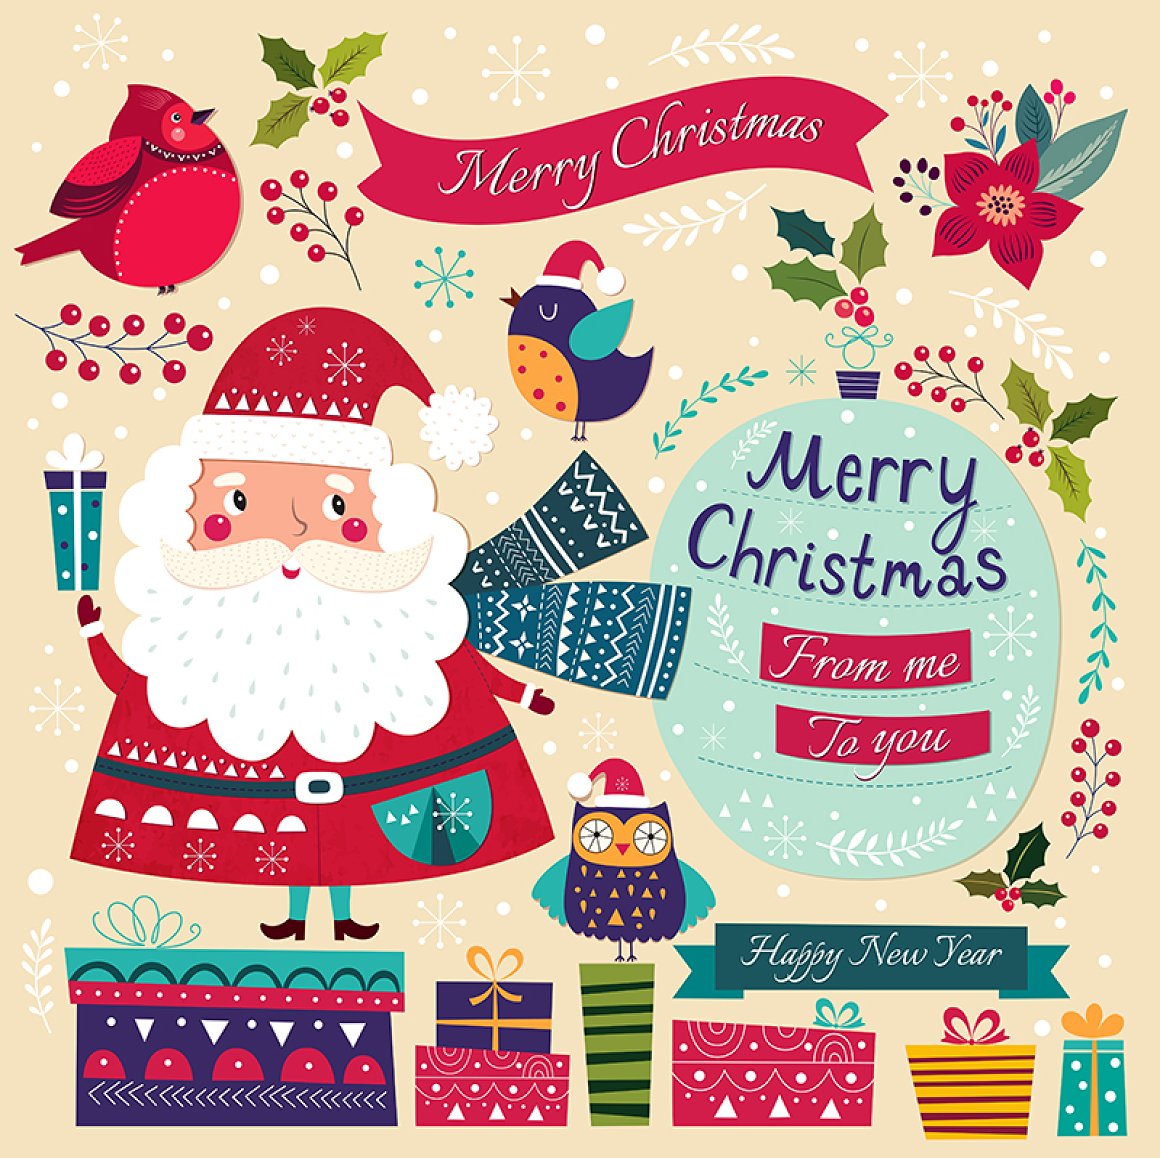 Merry Christmas illustration with a Santa and presents.